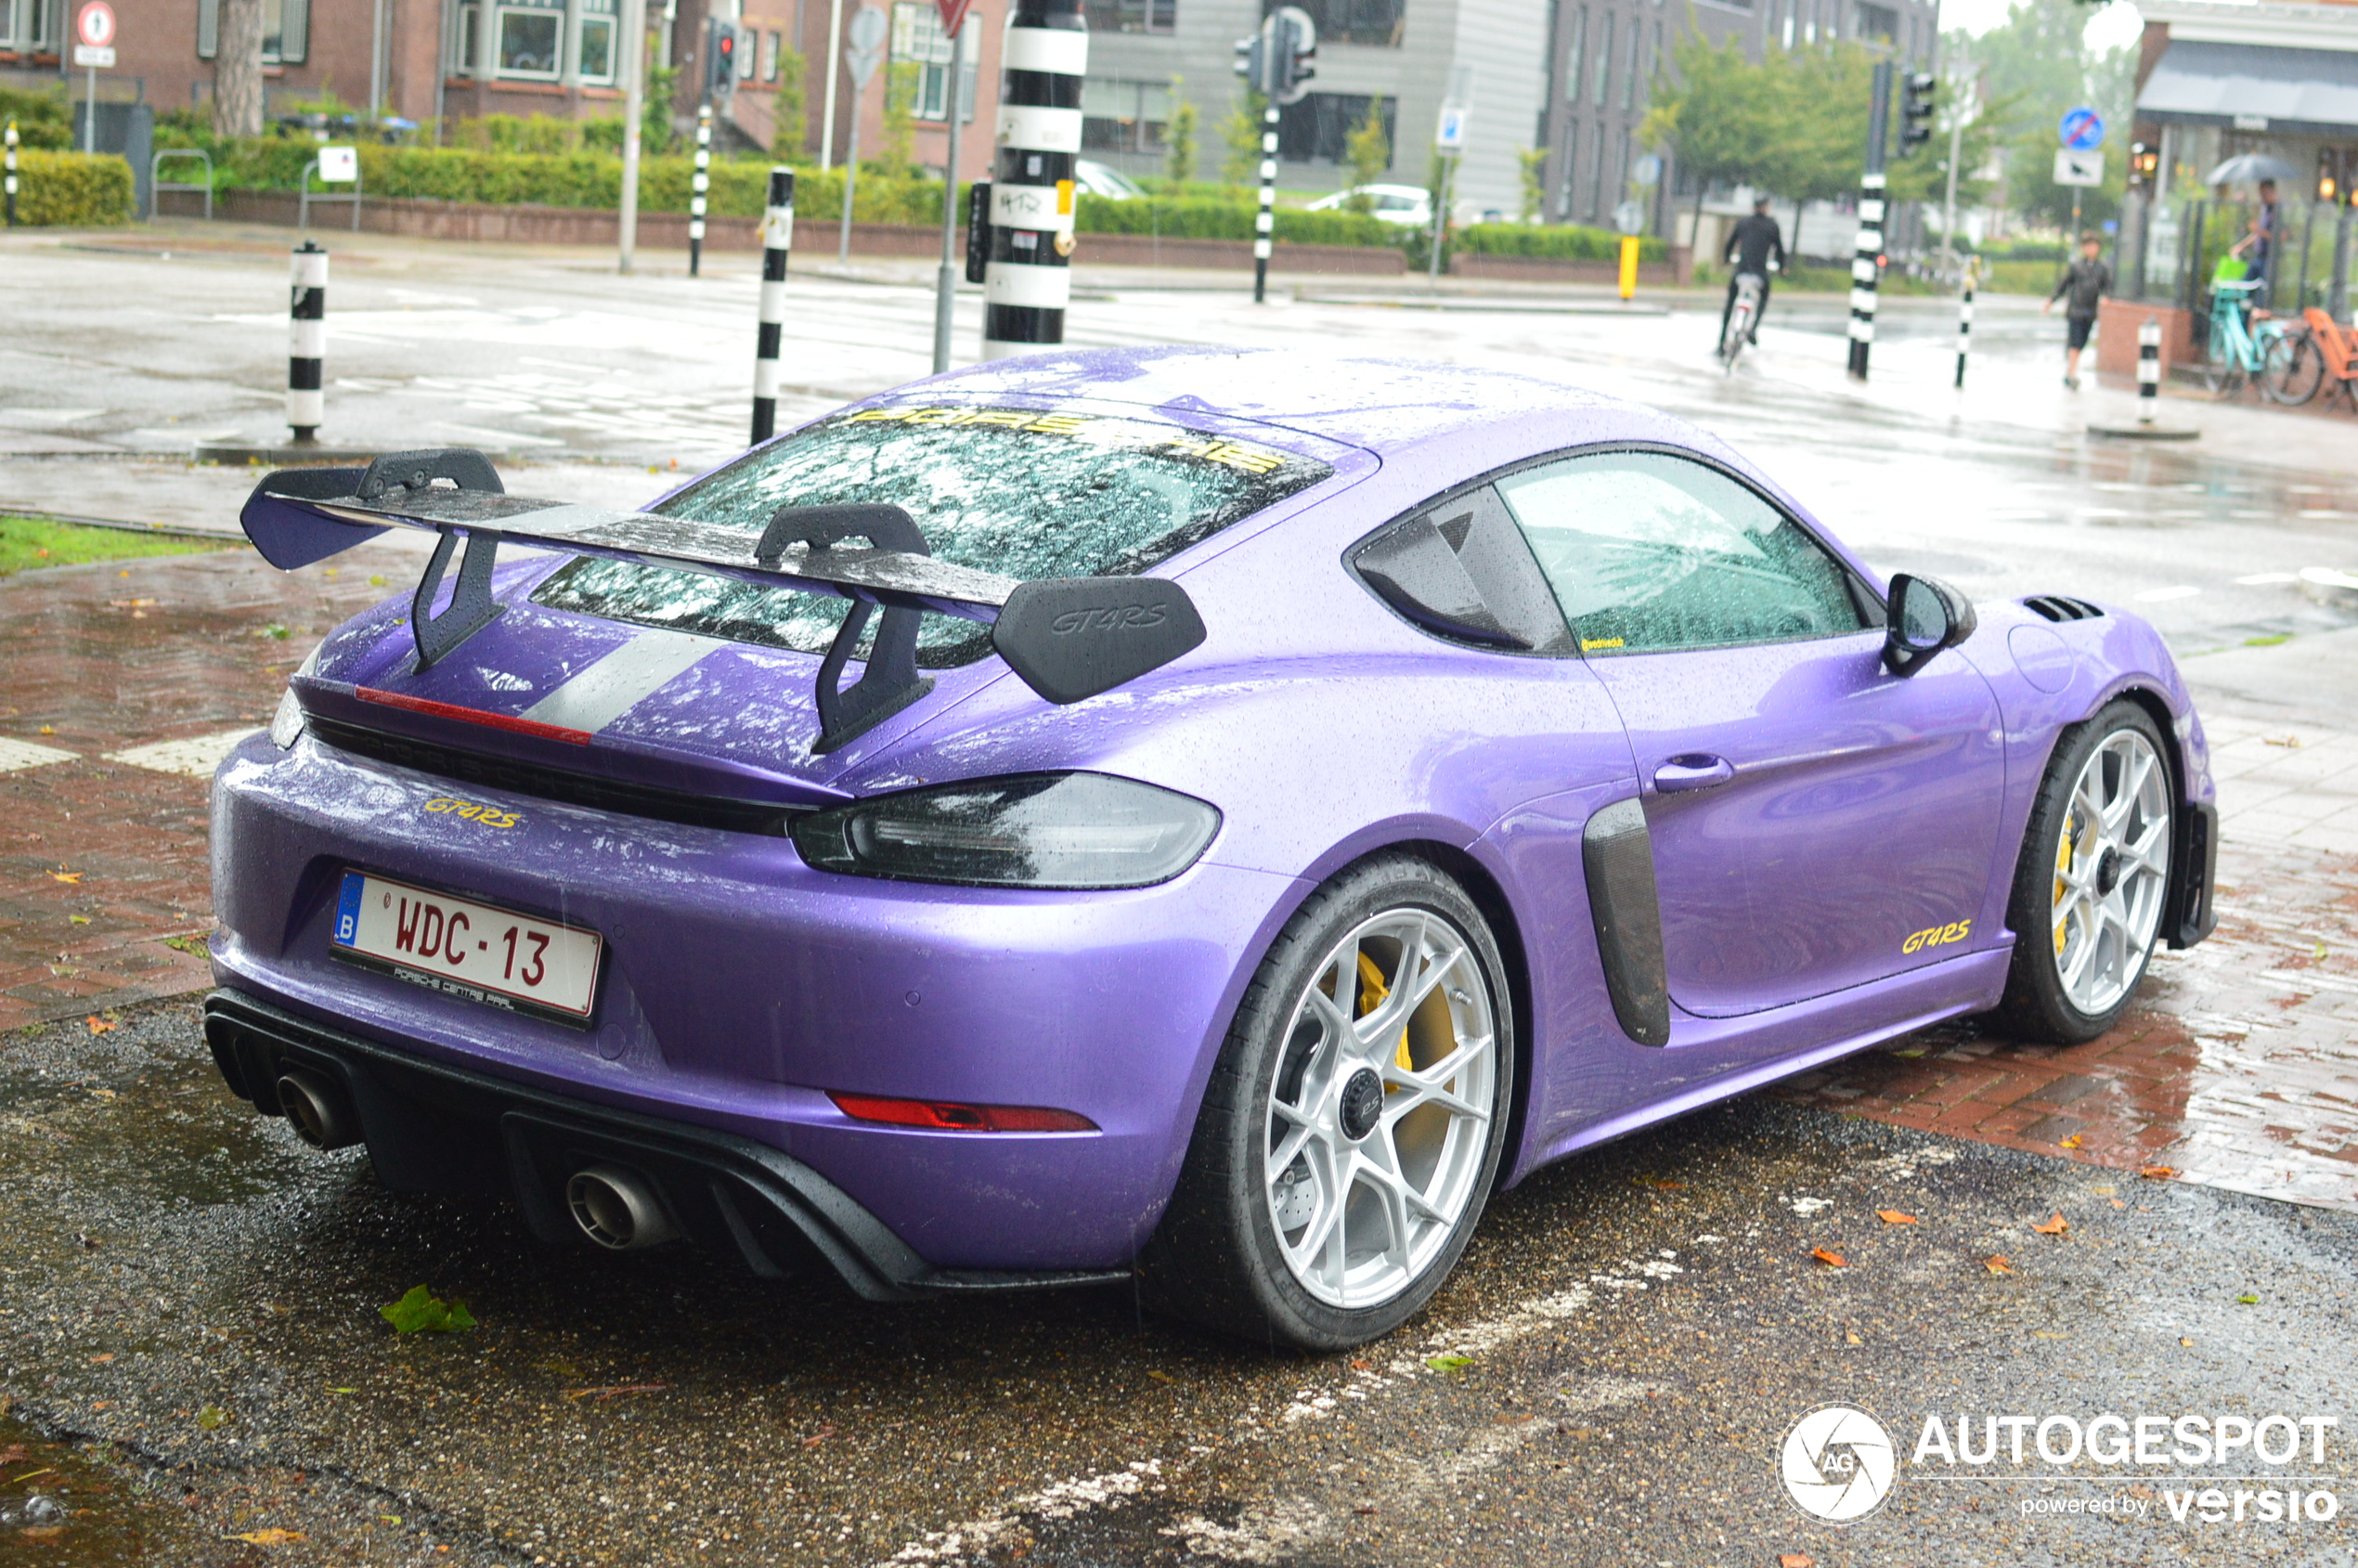 A stunning color on this GT4 RS